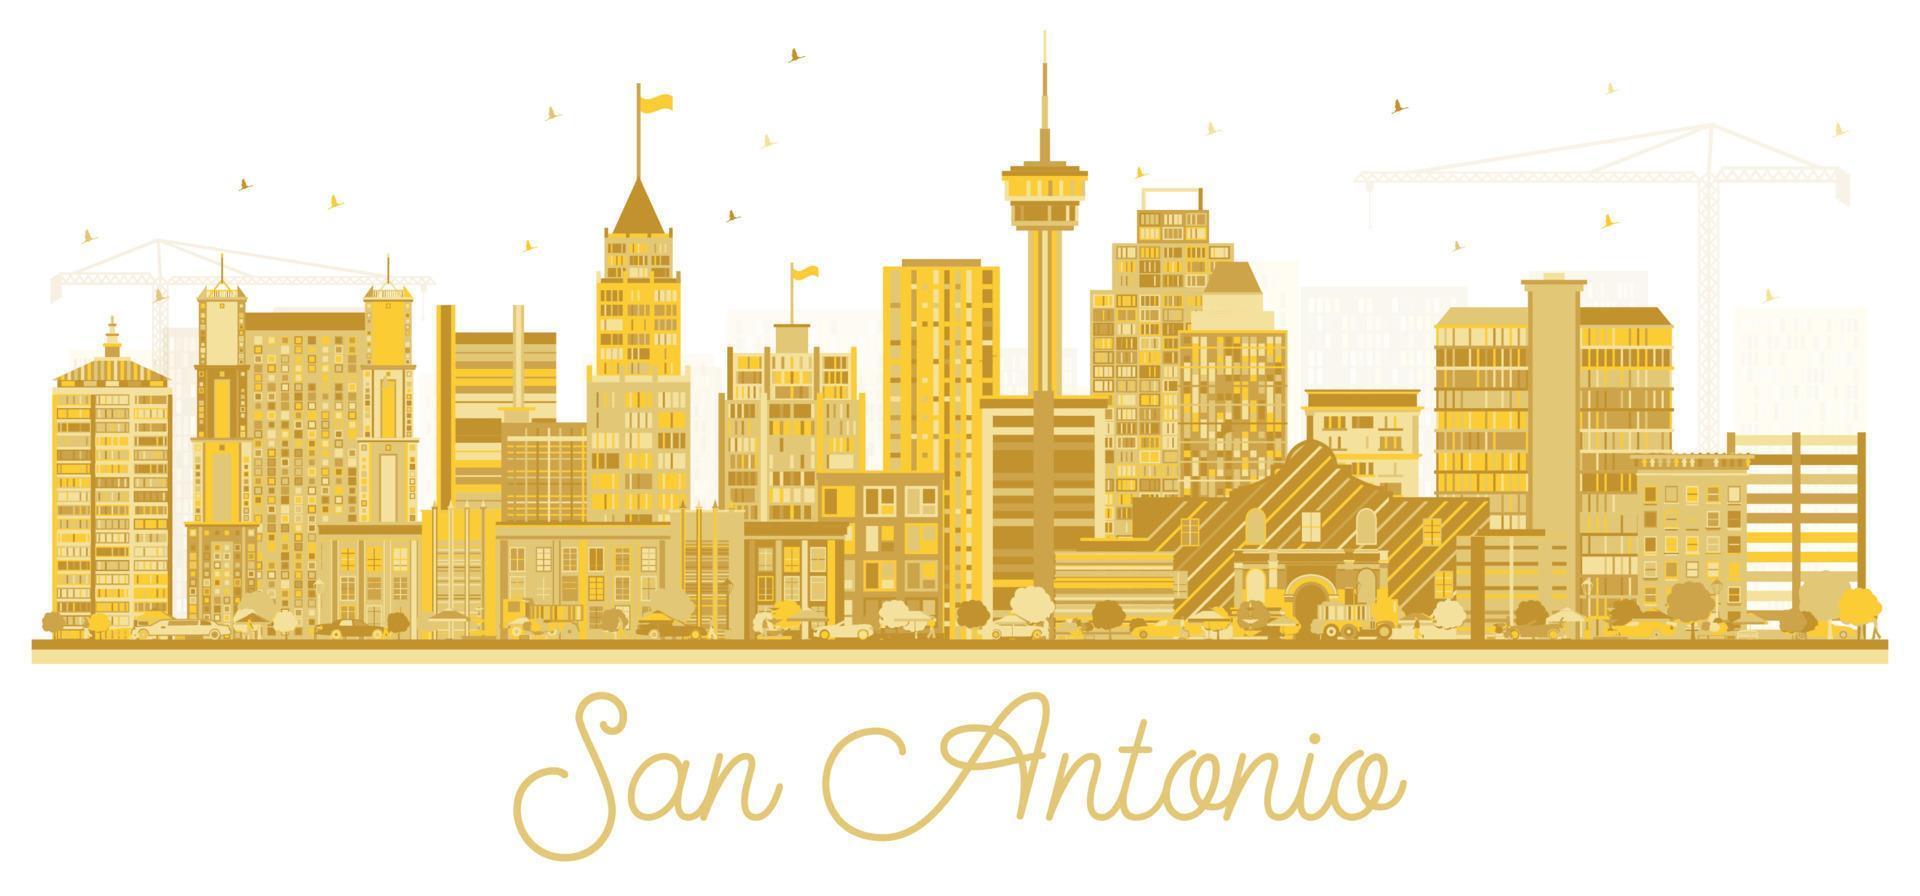 San Antonio Texas USA City Skyline Silhouette with Golden Buildings Isolated on White. vector